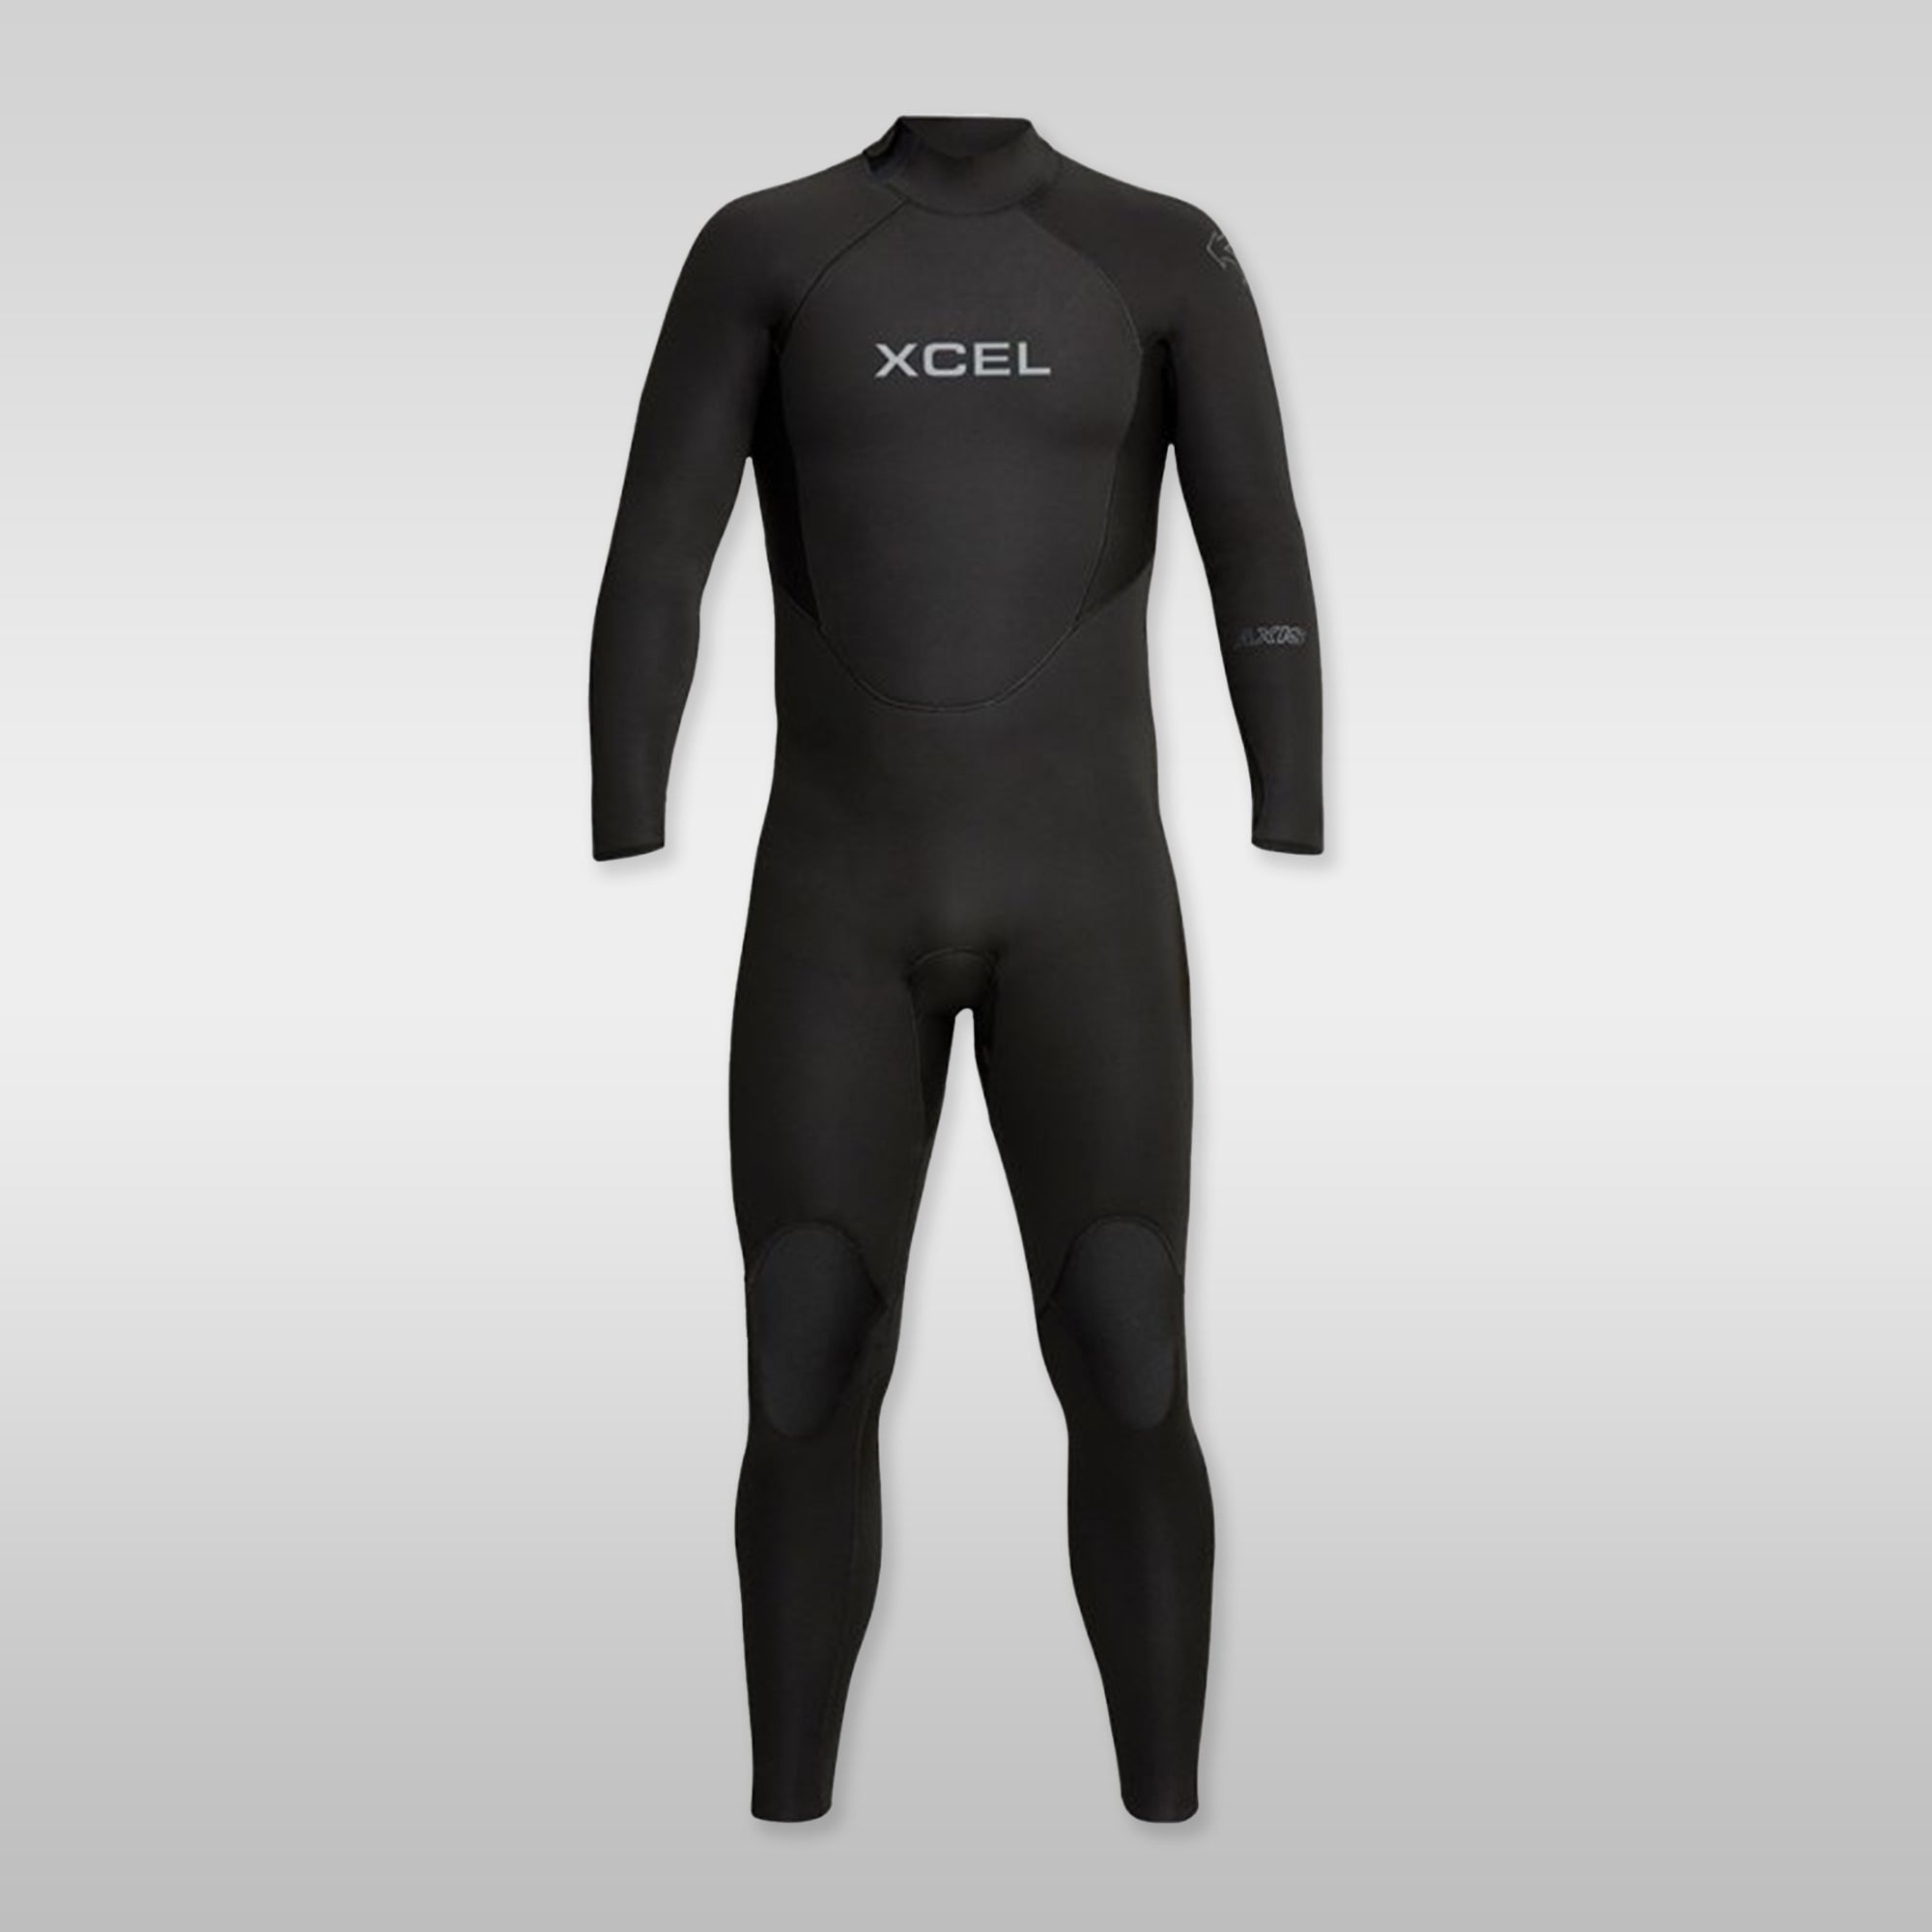 Xcel Axis OS 5/4 Wetsuit Wetsuit